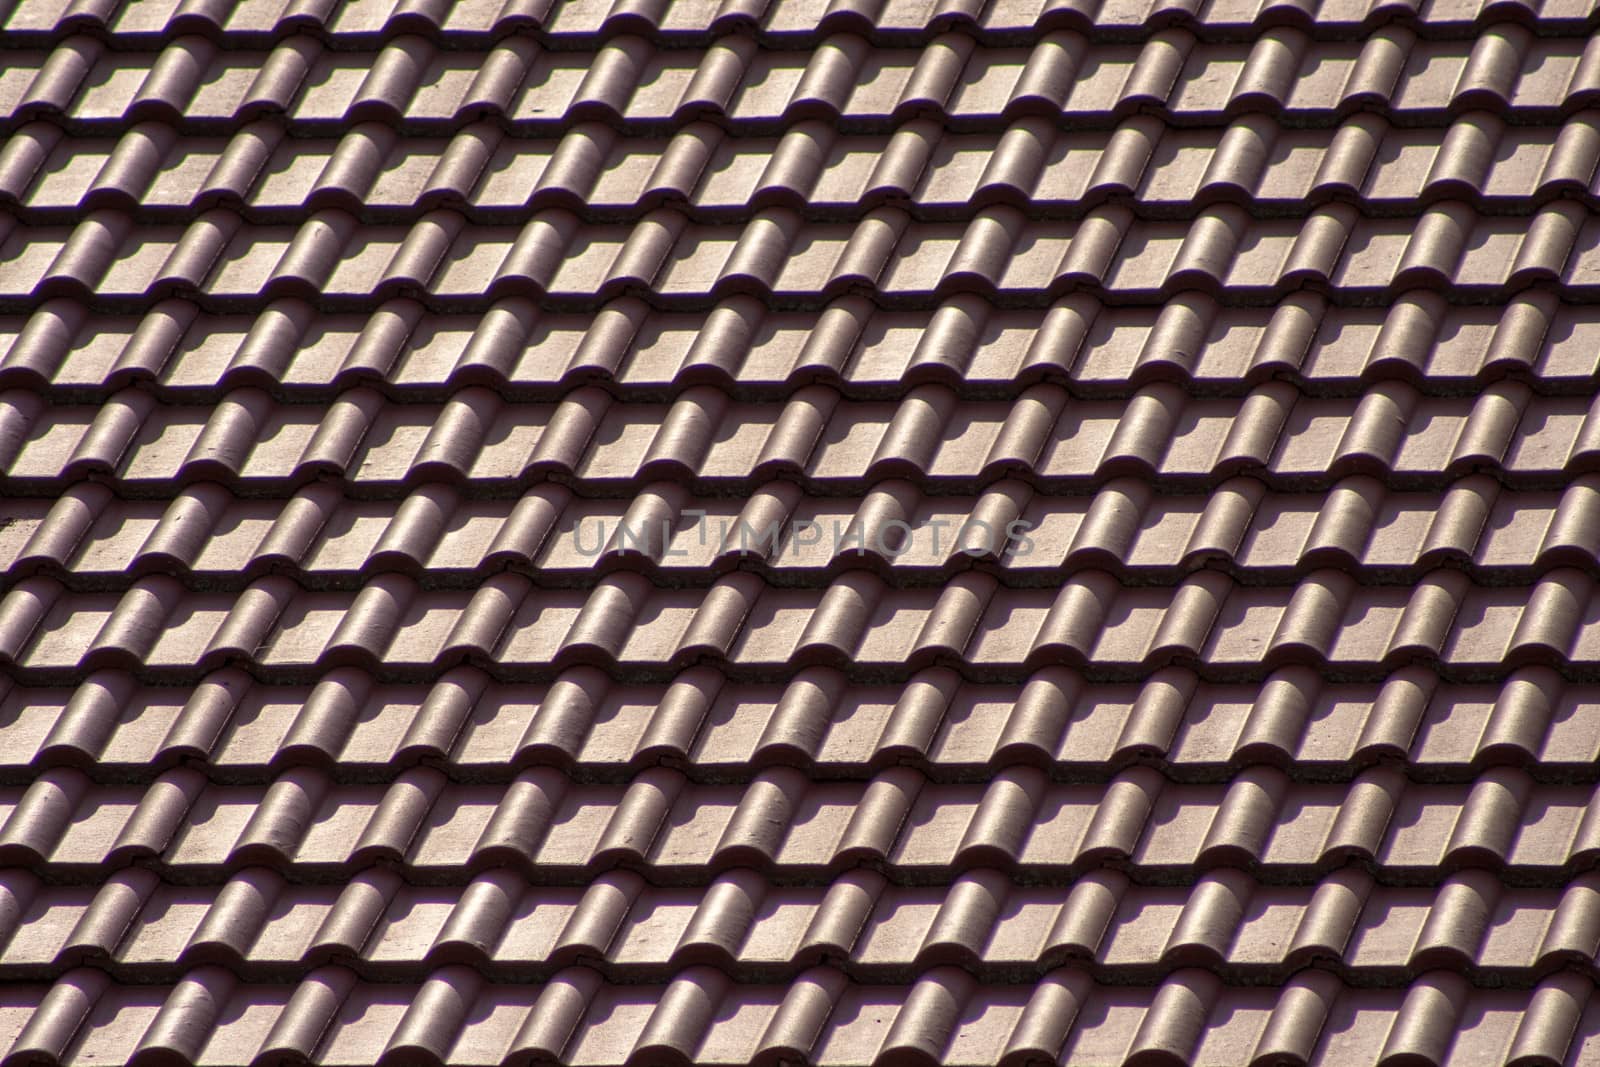 Red tiles of the house's roof.